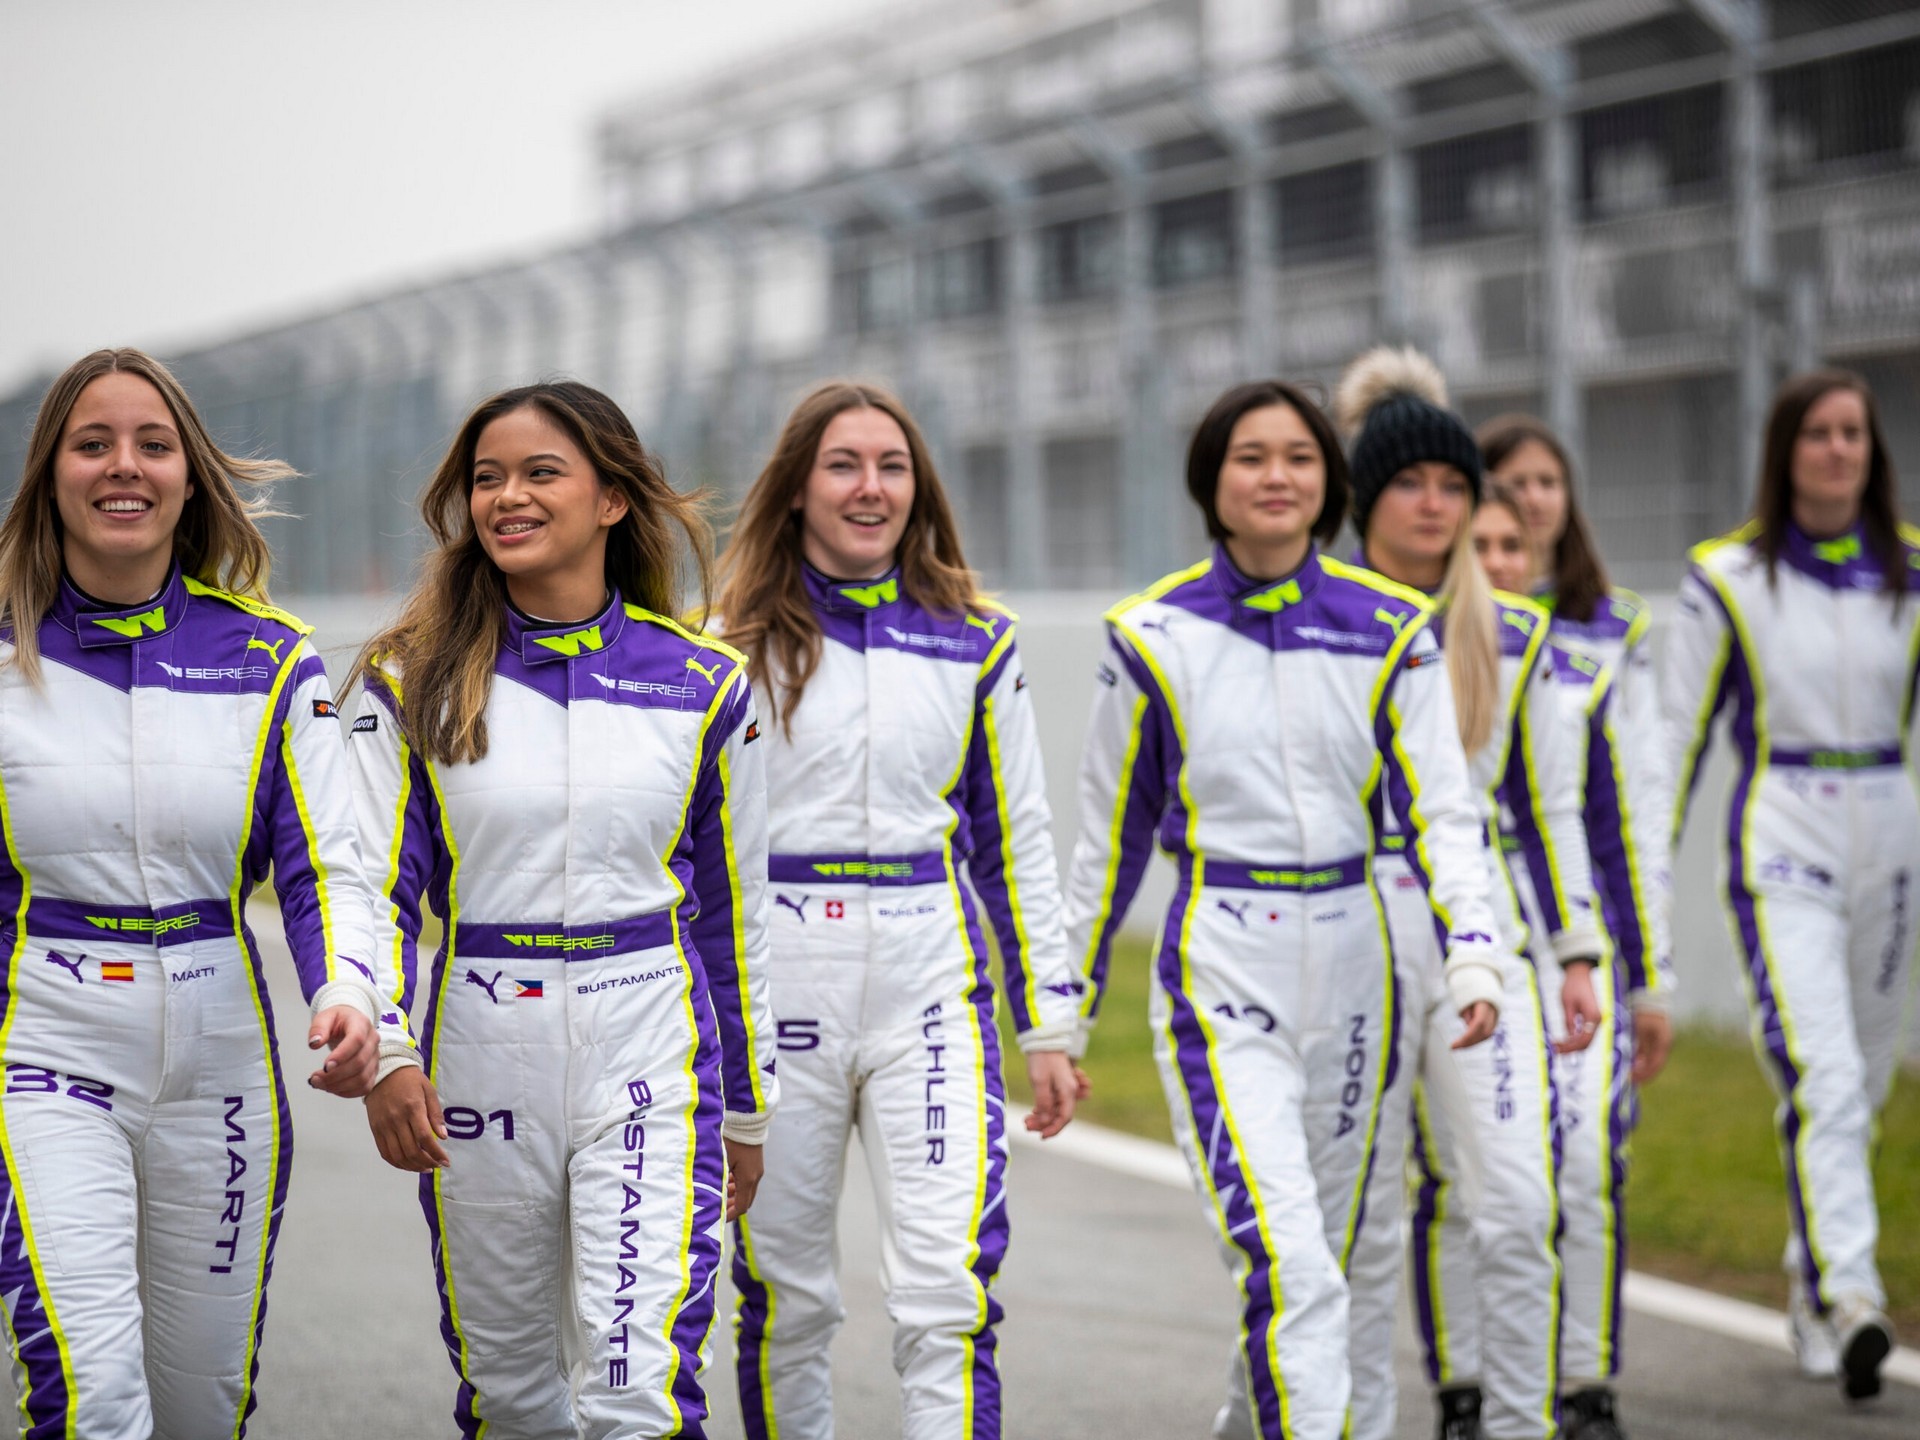 f1-academy-debuts-in-2023-as-a-formula-1-endorsed-women-only-competition-autoevolution